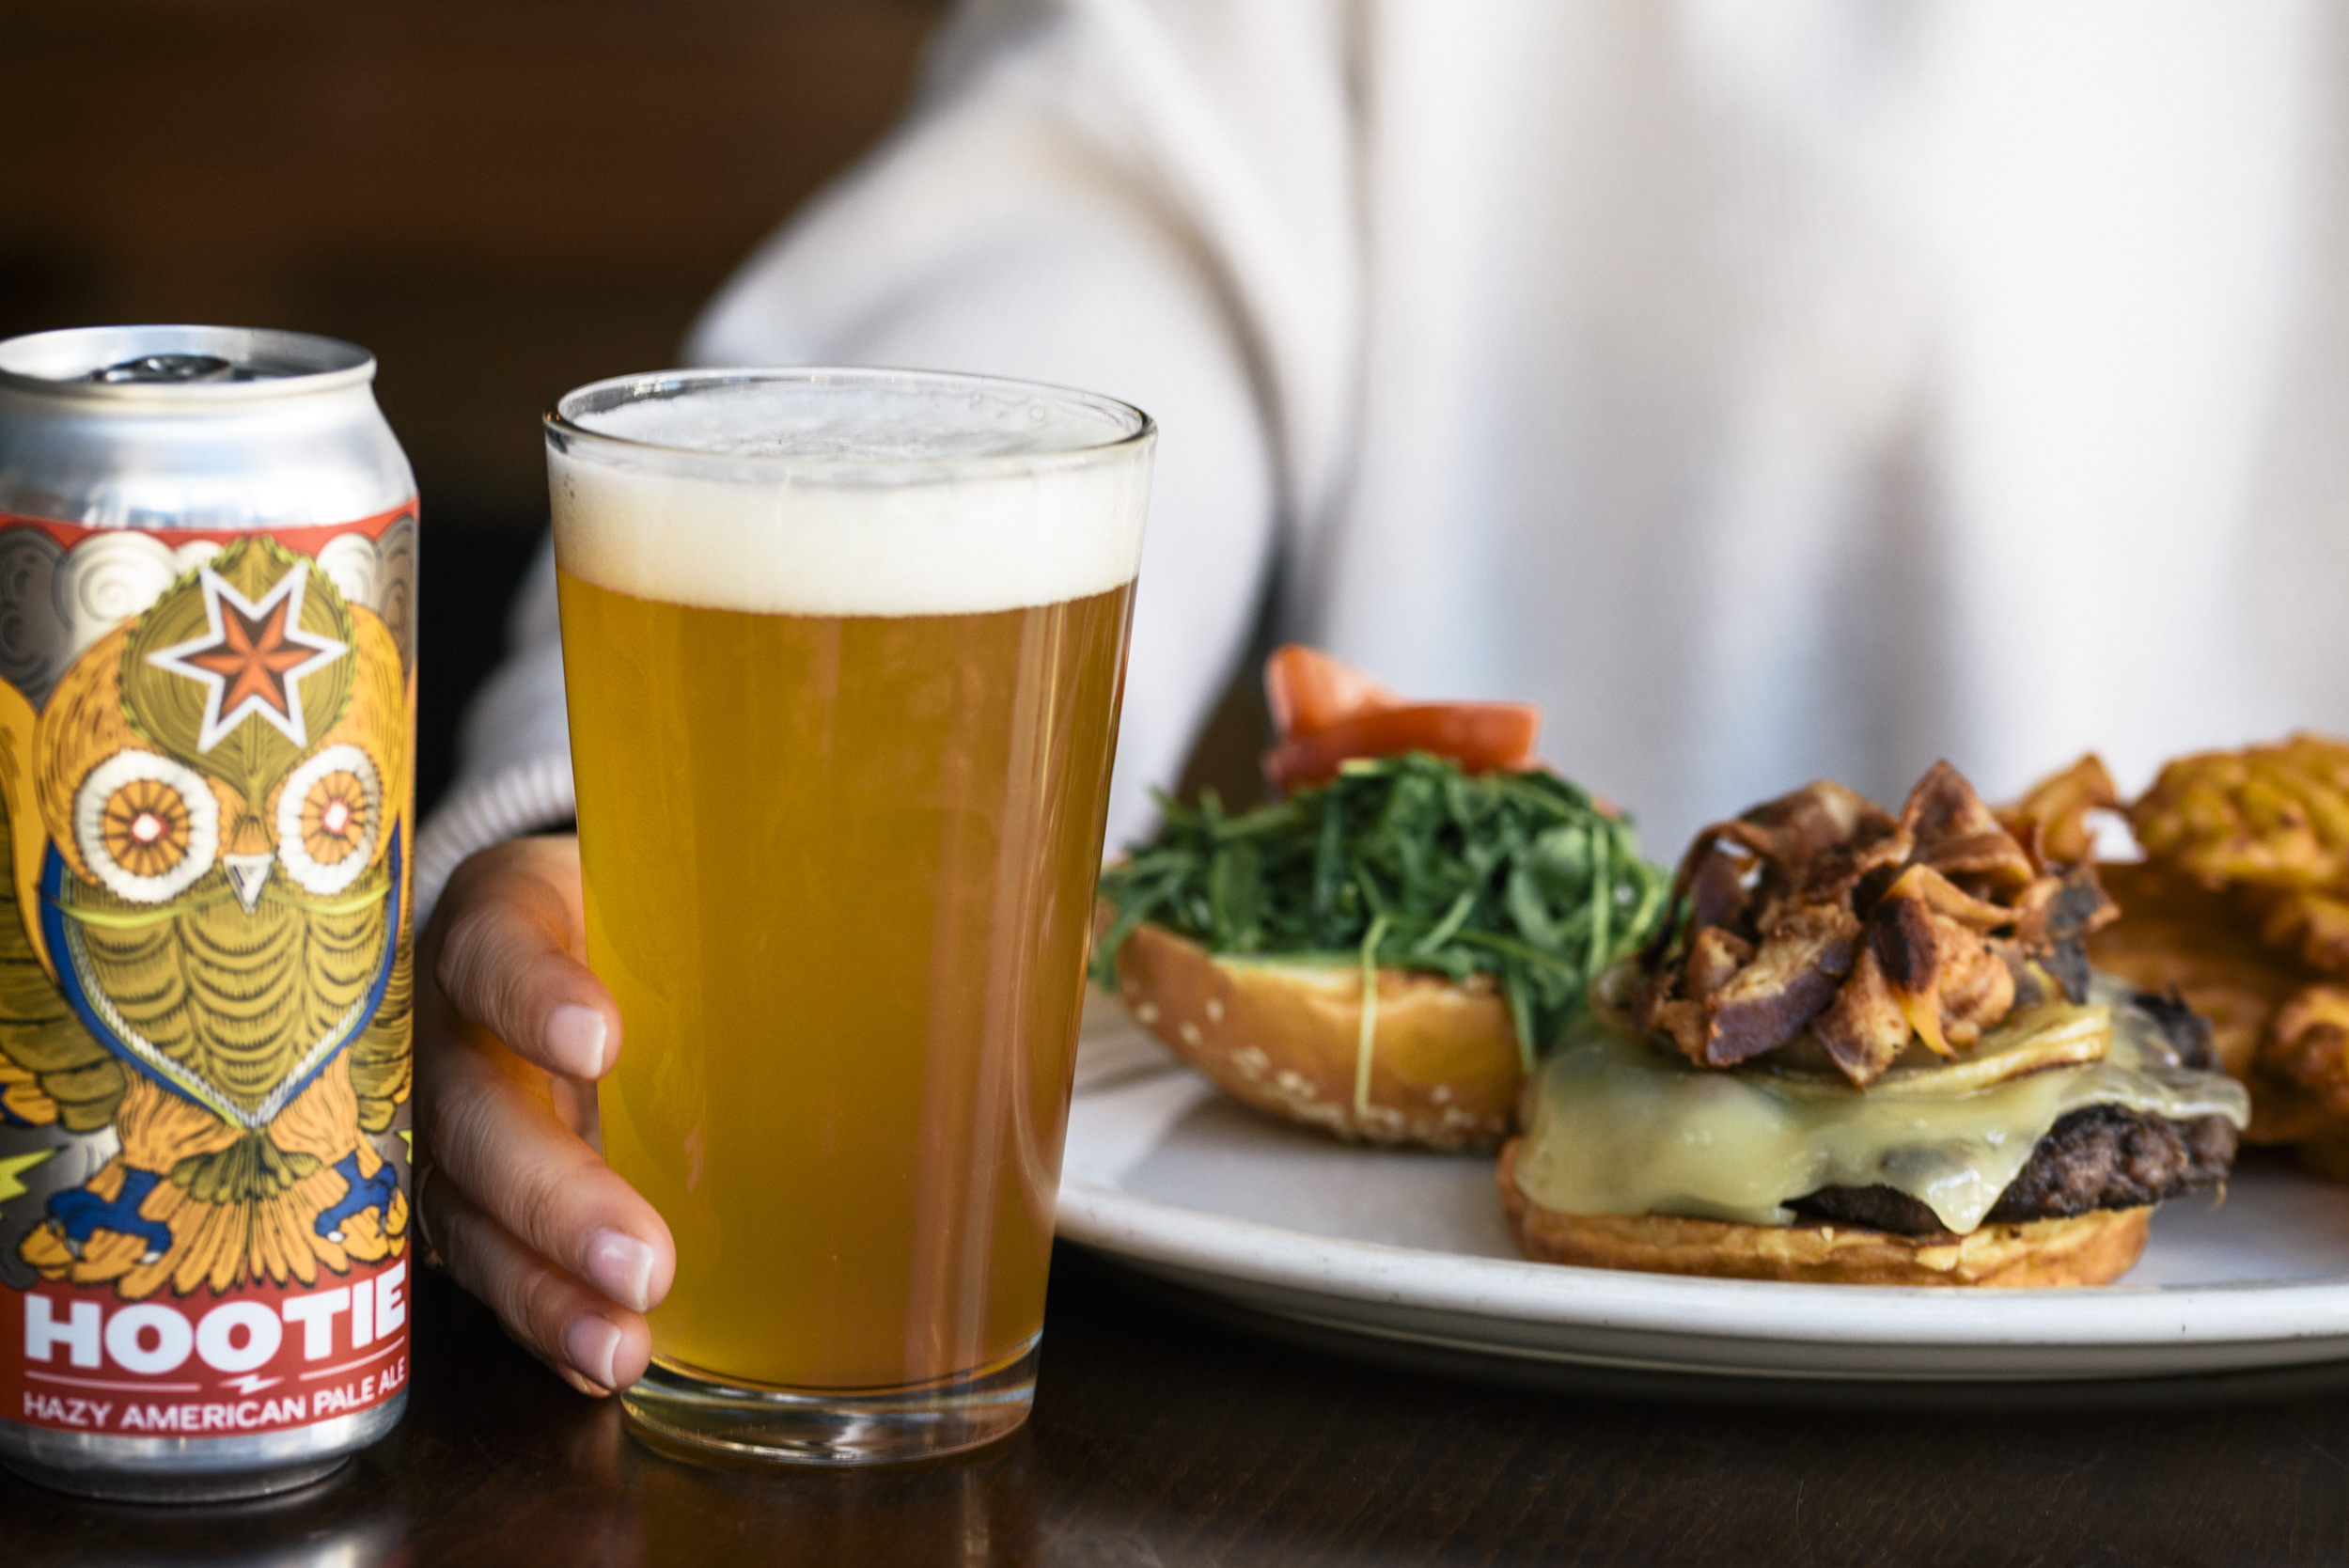 a close up of a woman with open bacon cheese burger on a plate infront of her with a pint of freshly poured Hootie beer next to plate and can of beer on left side of photo